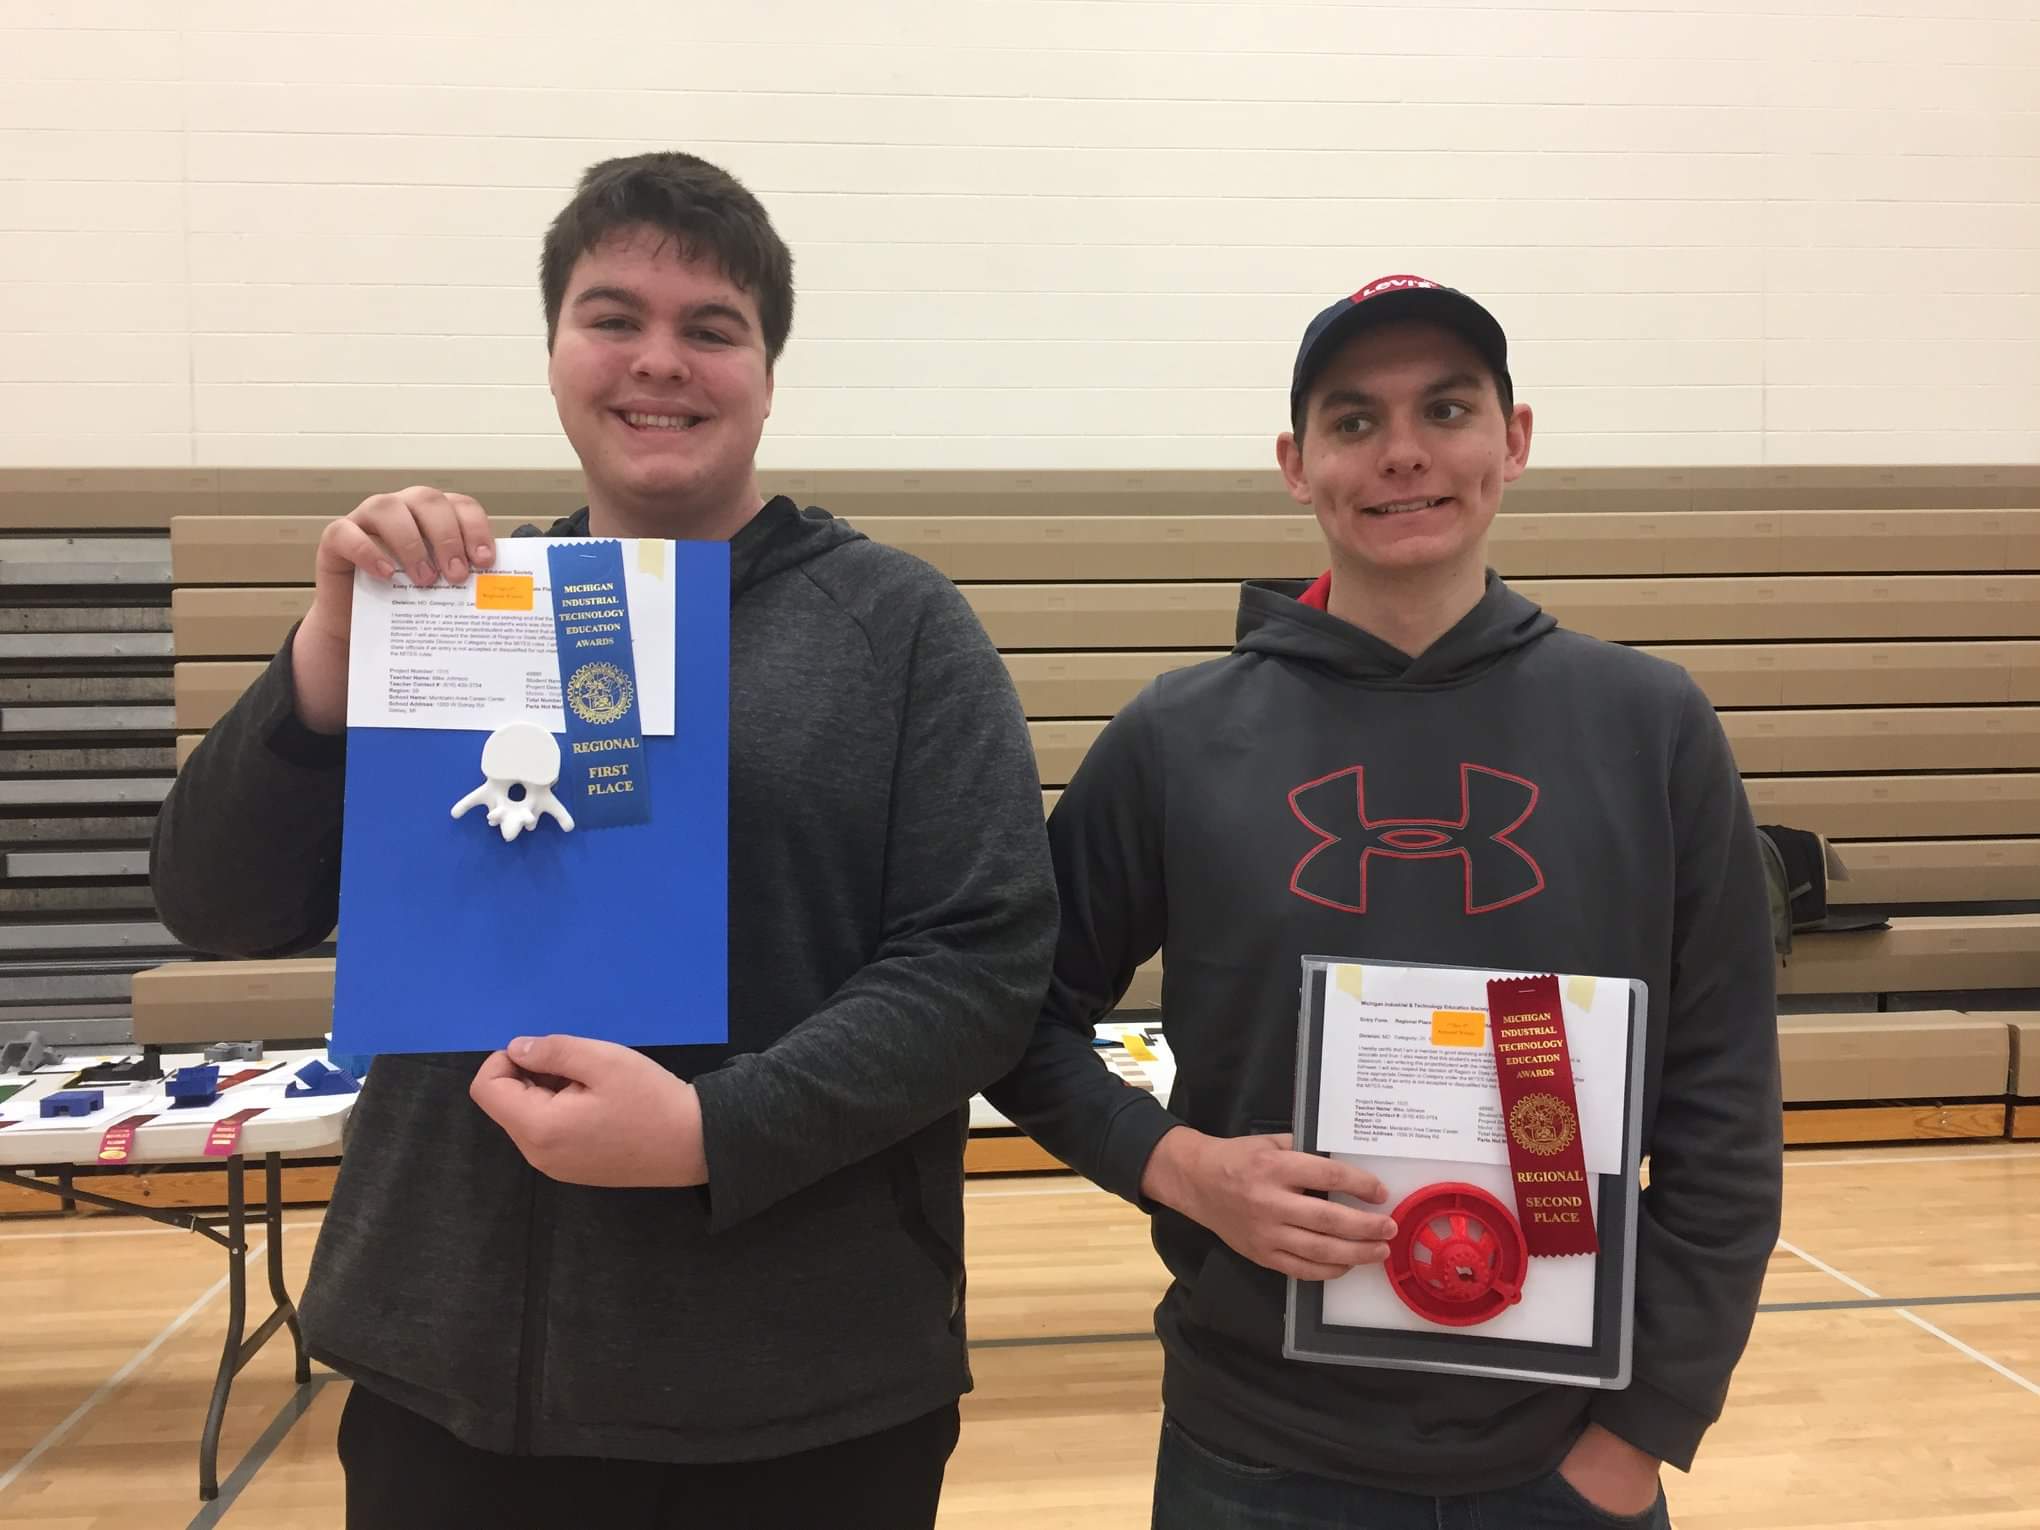 Two CAD students displaying their prizes at the MITES competition.